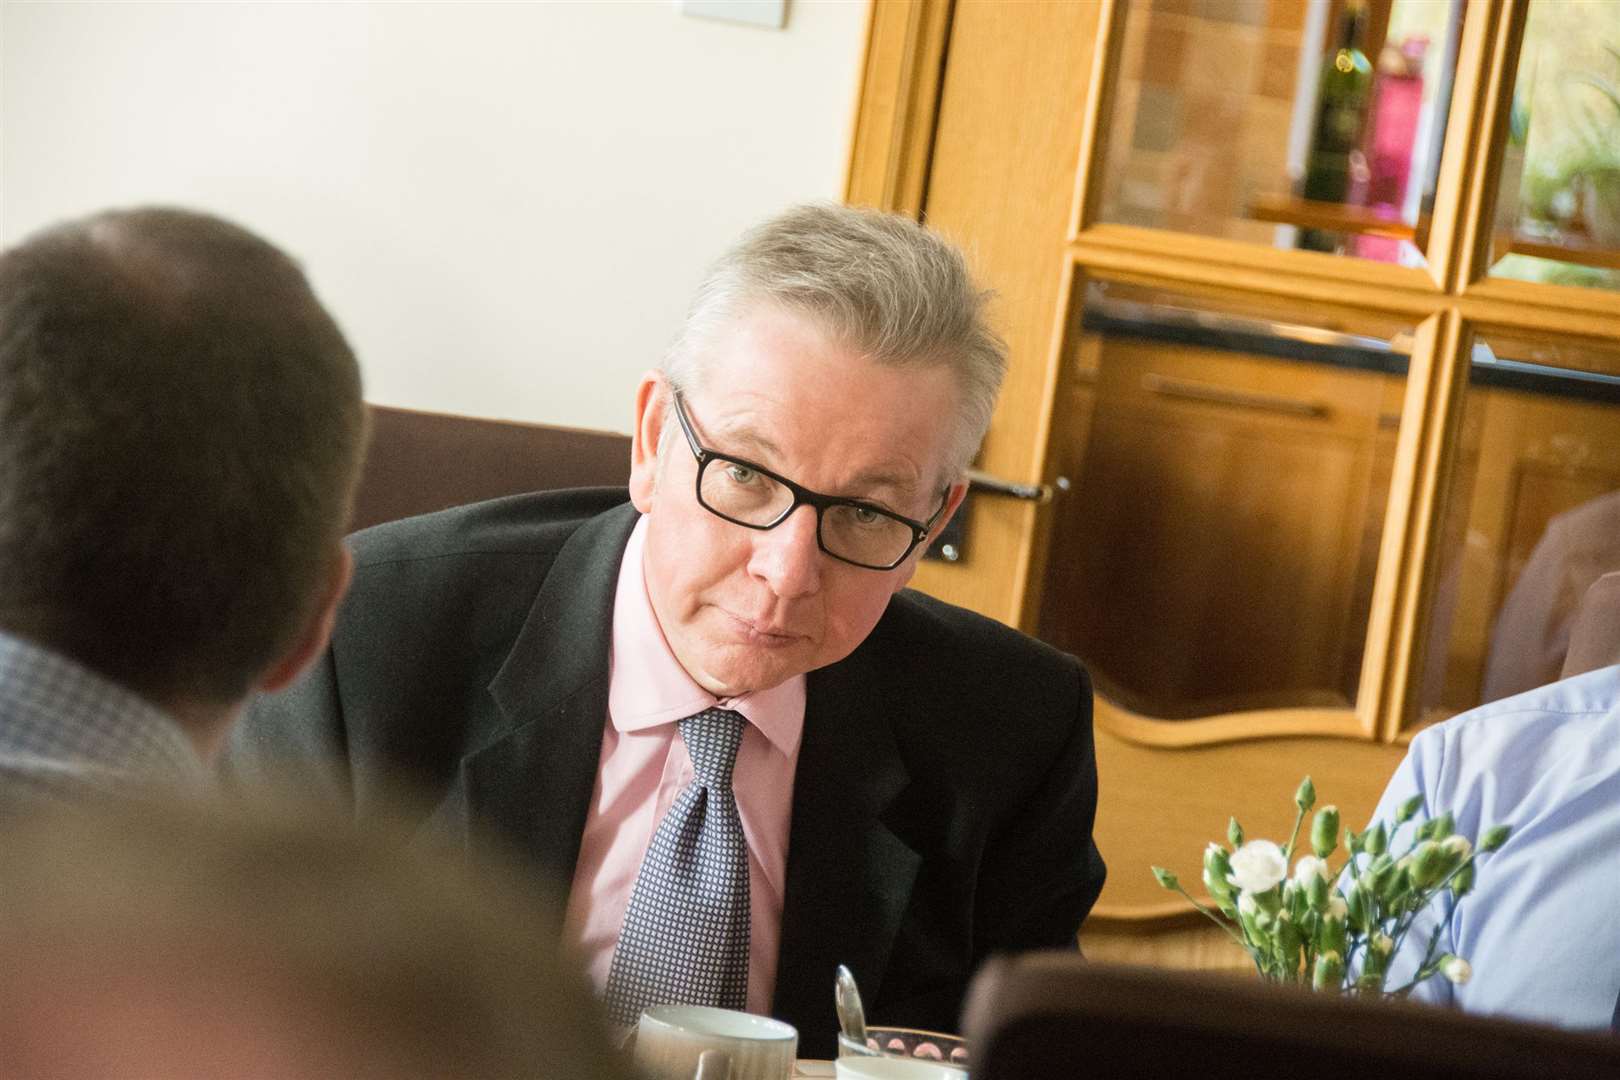 Michael Gove during a visit to Moray. Picture: Becky Saunderson